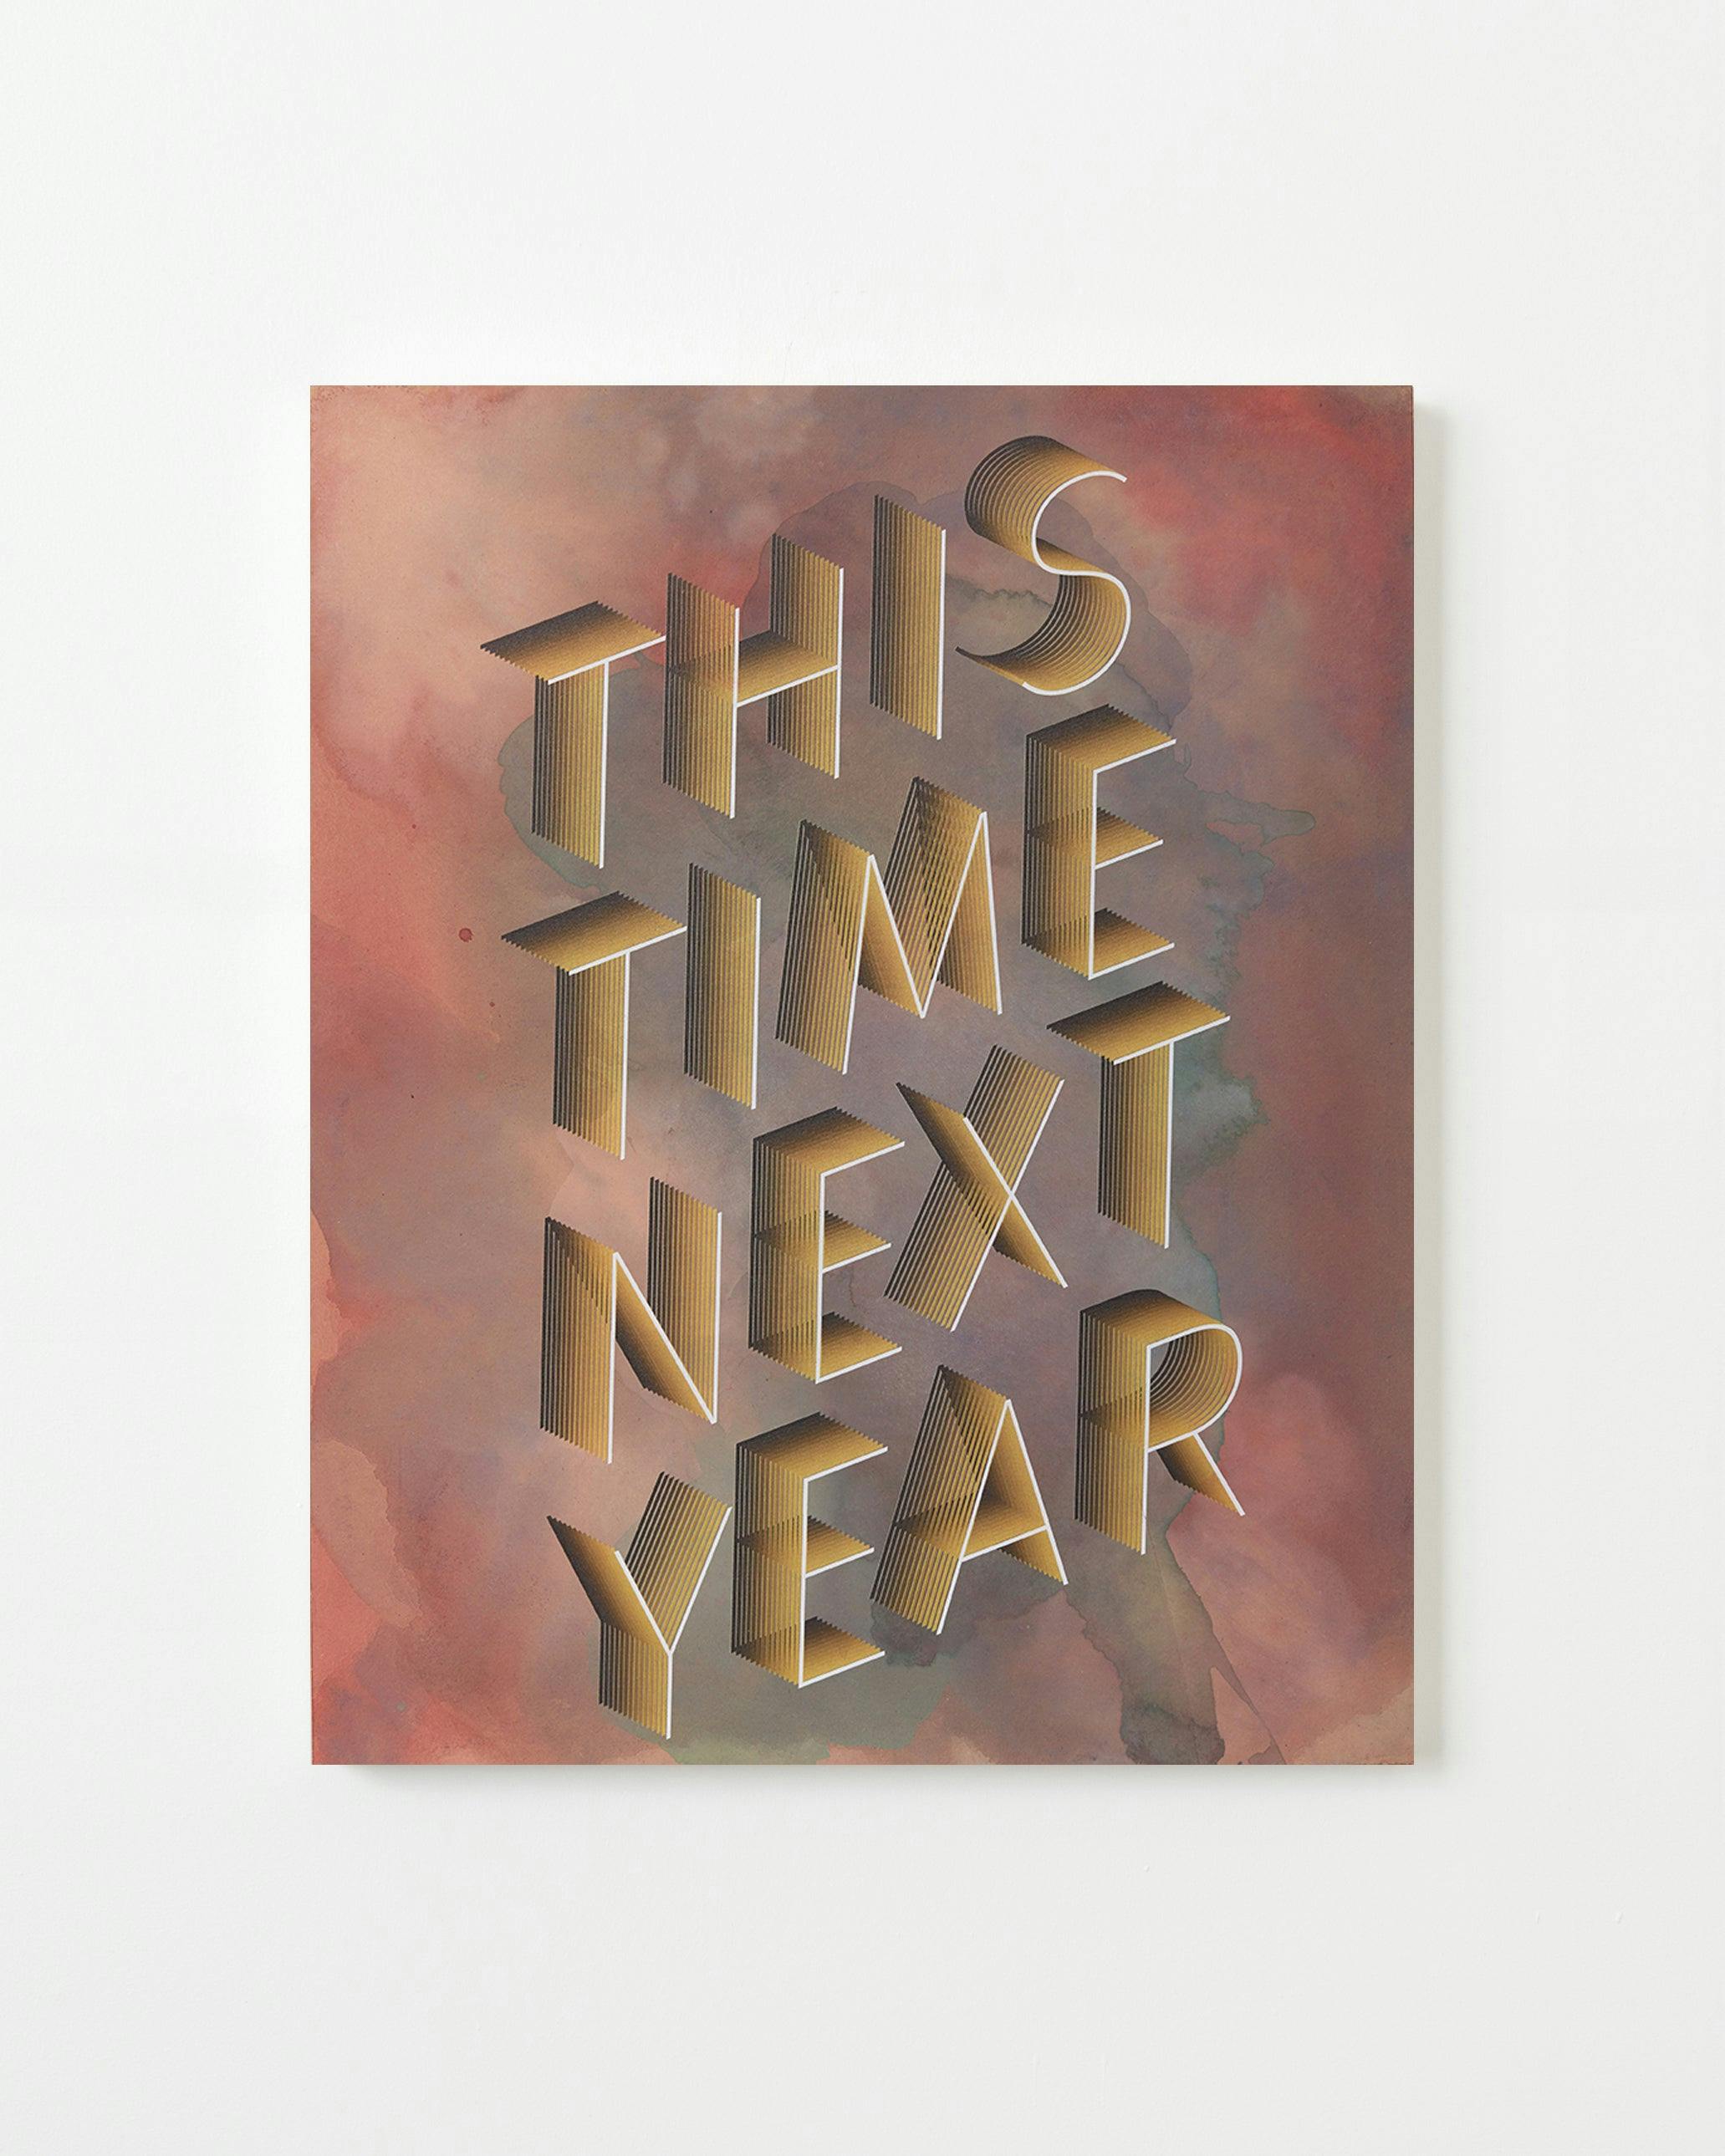 Painting by Ben Skinner titled "This Time Next Year".